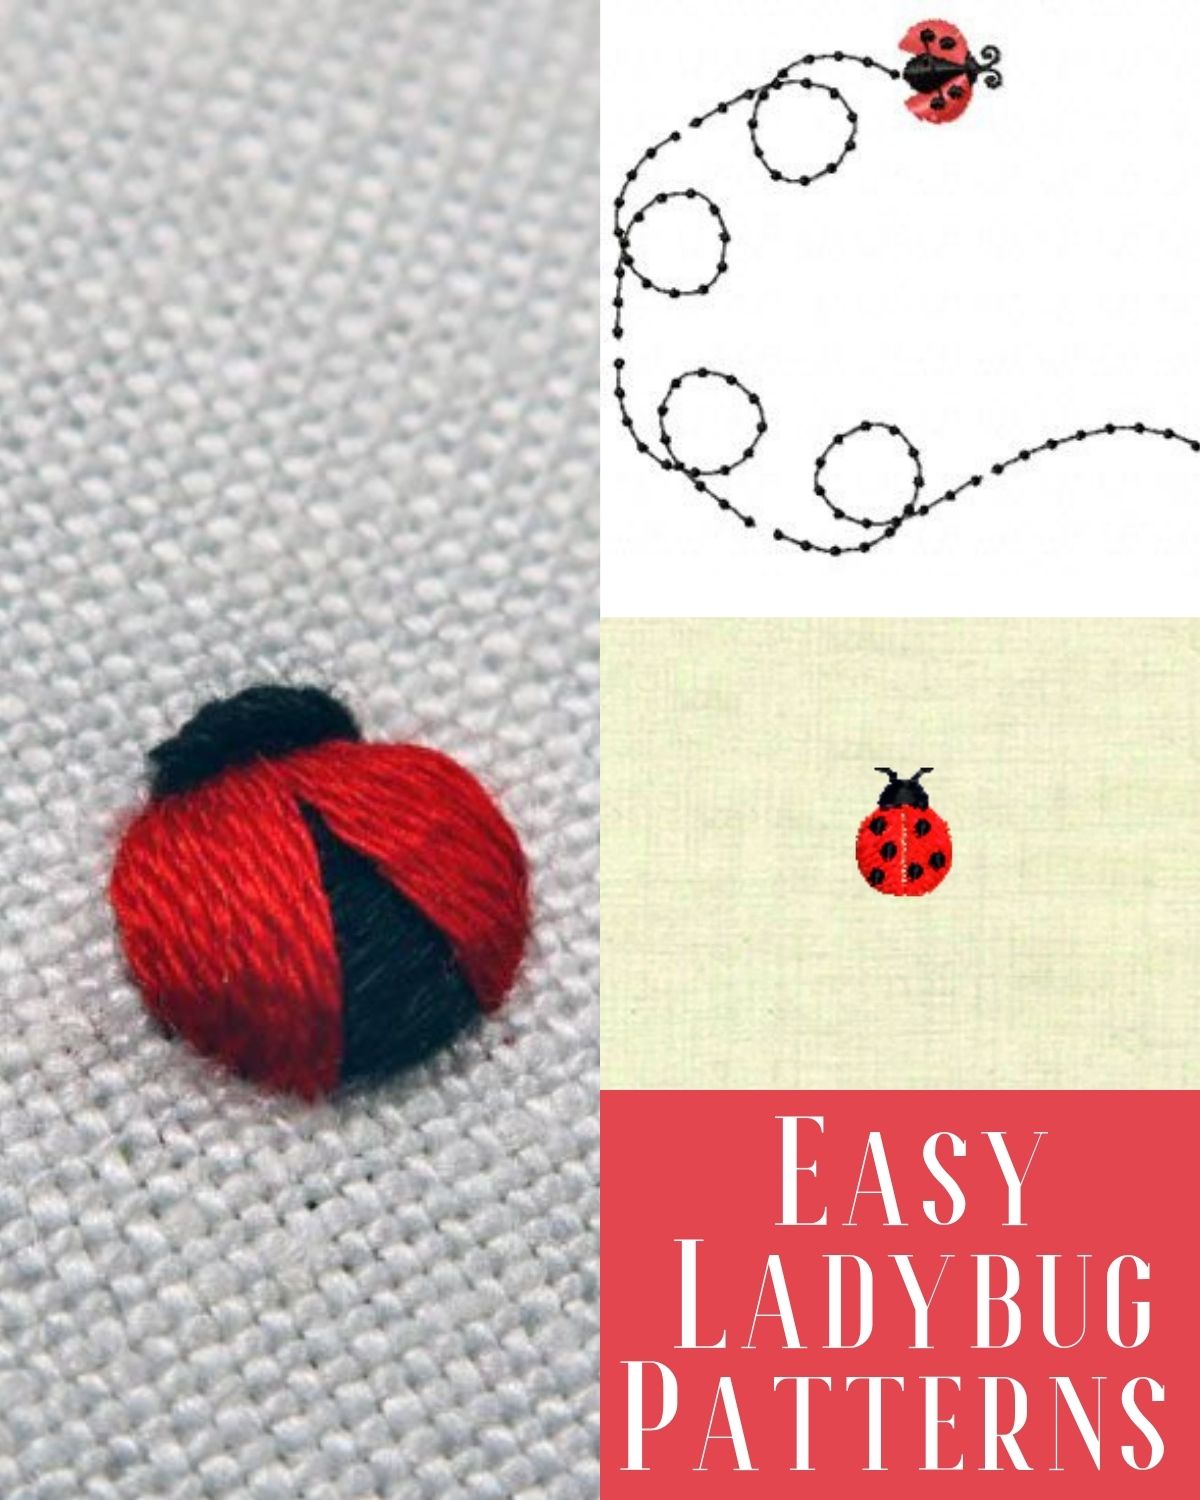 Easy embroidery designs with bugs